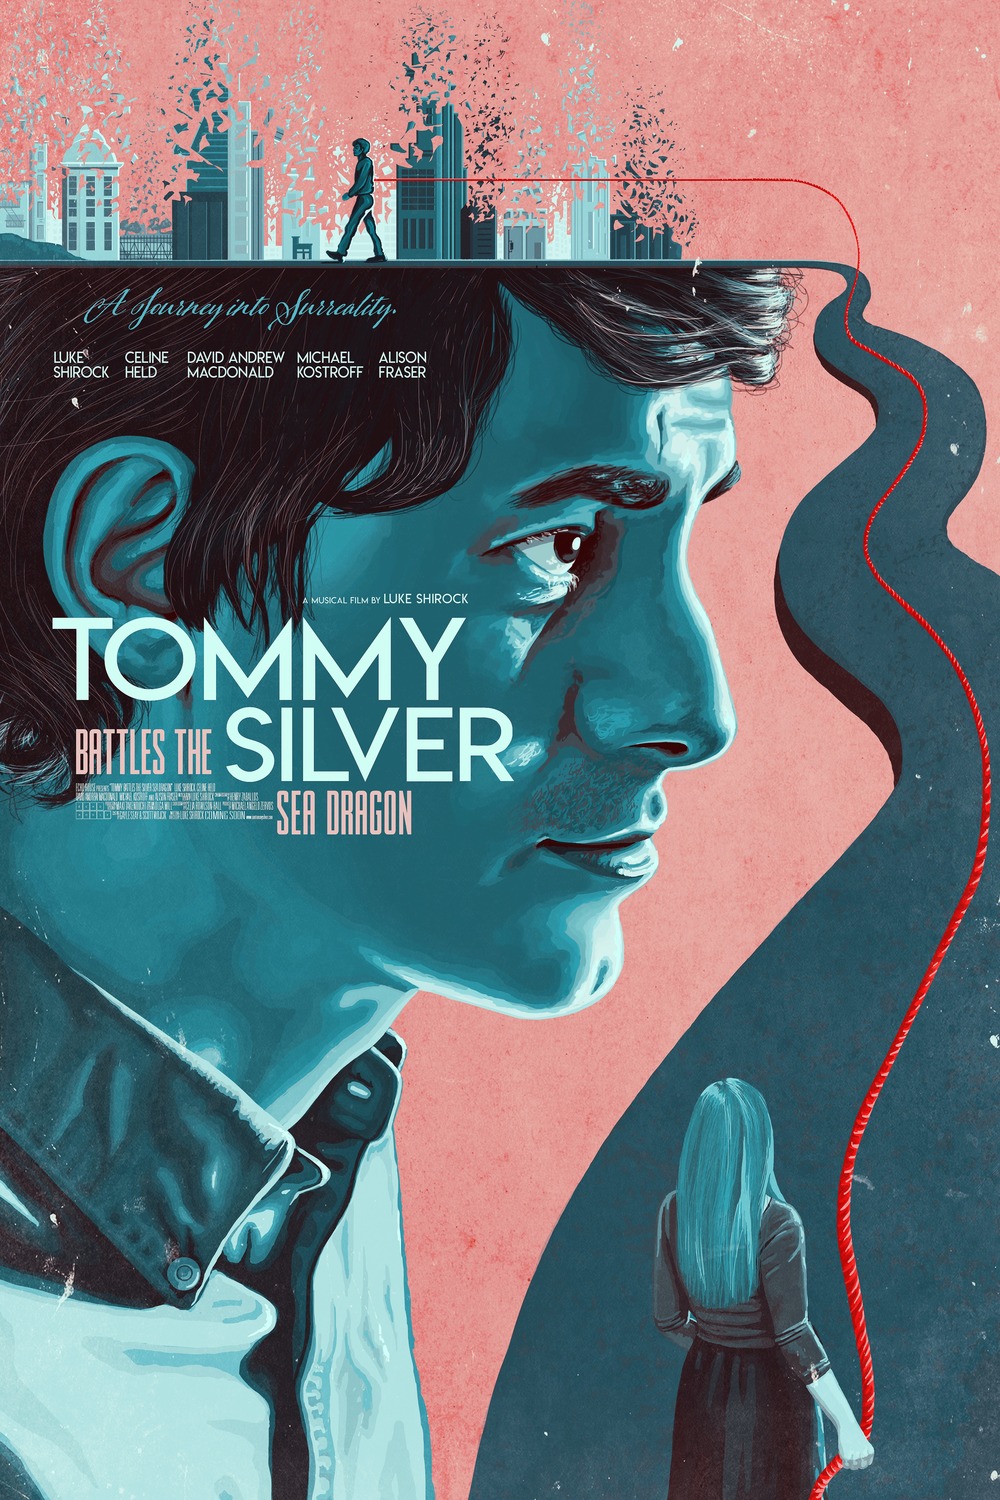 Extra Large Movie Poster Image for Tommy Battles the Silver Sea Dragon 